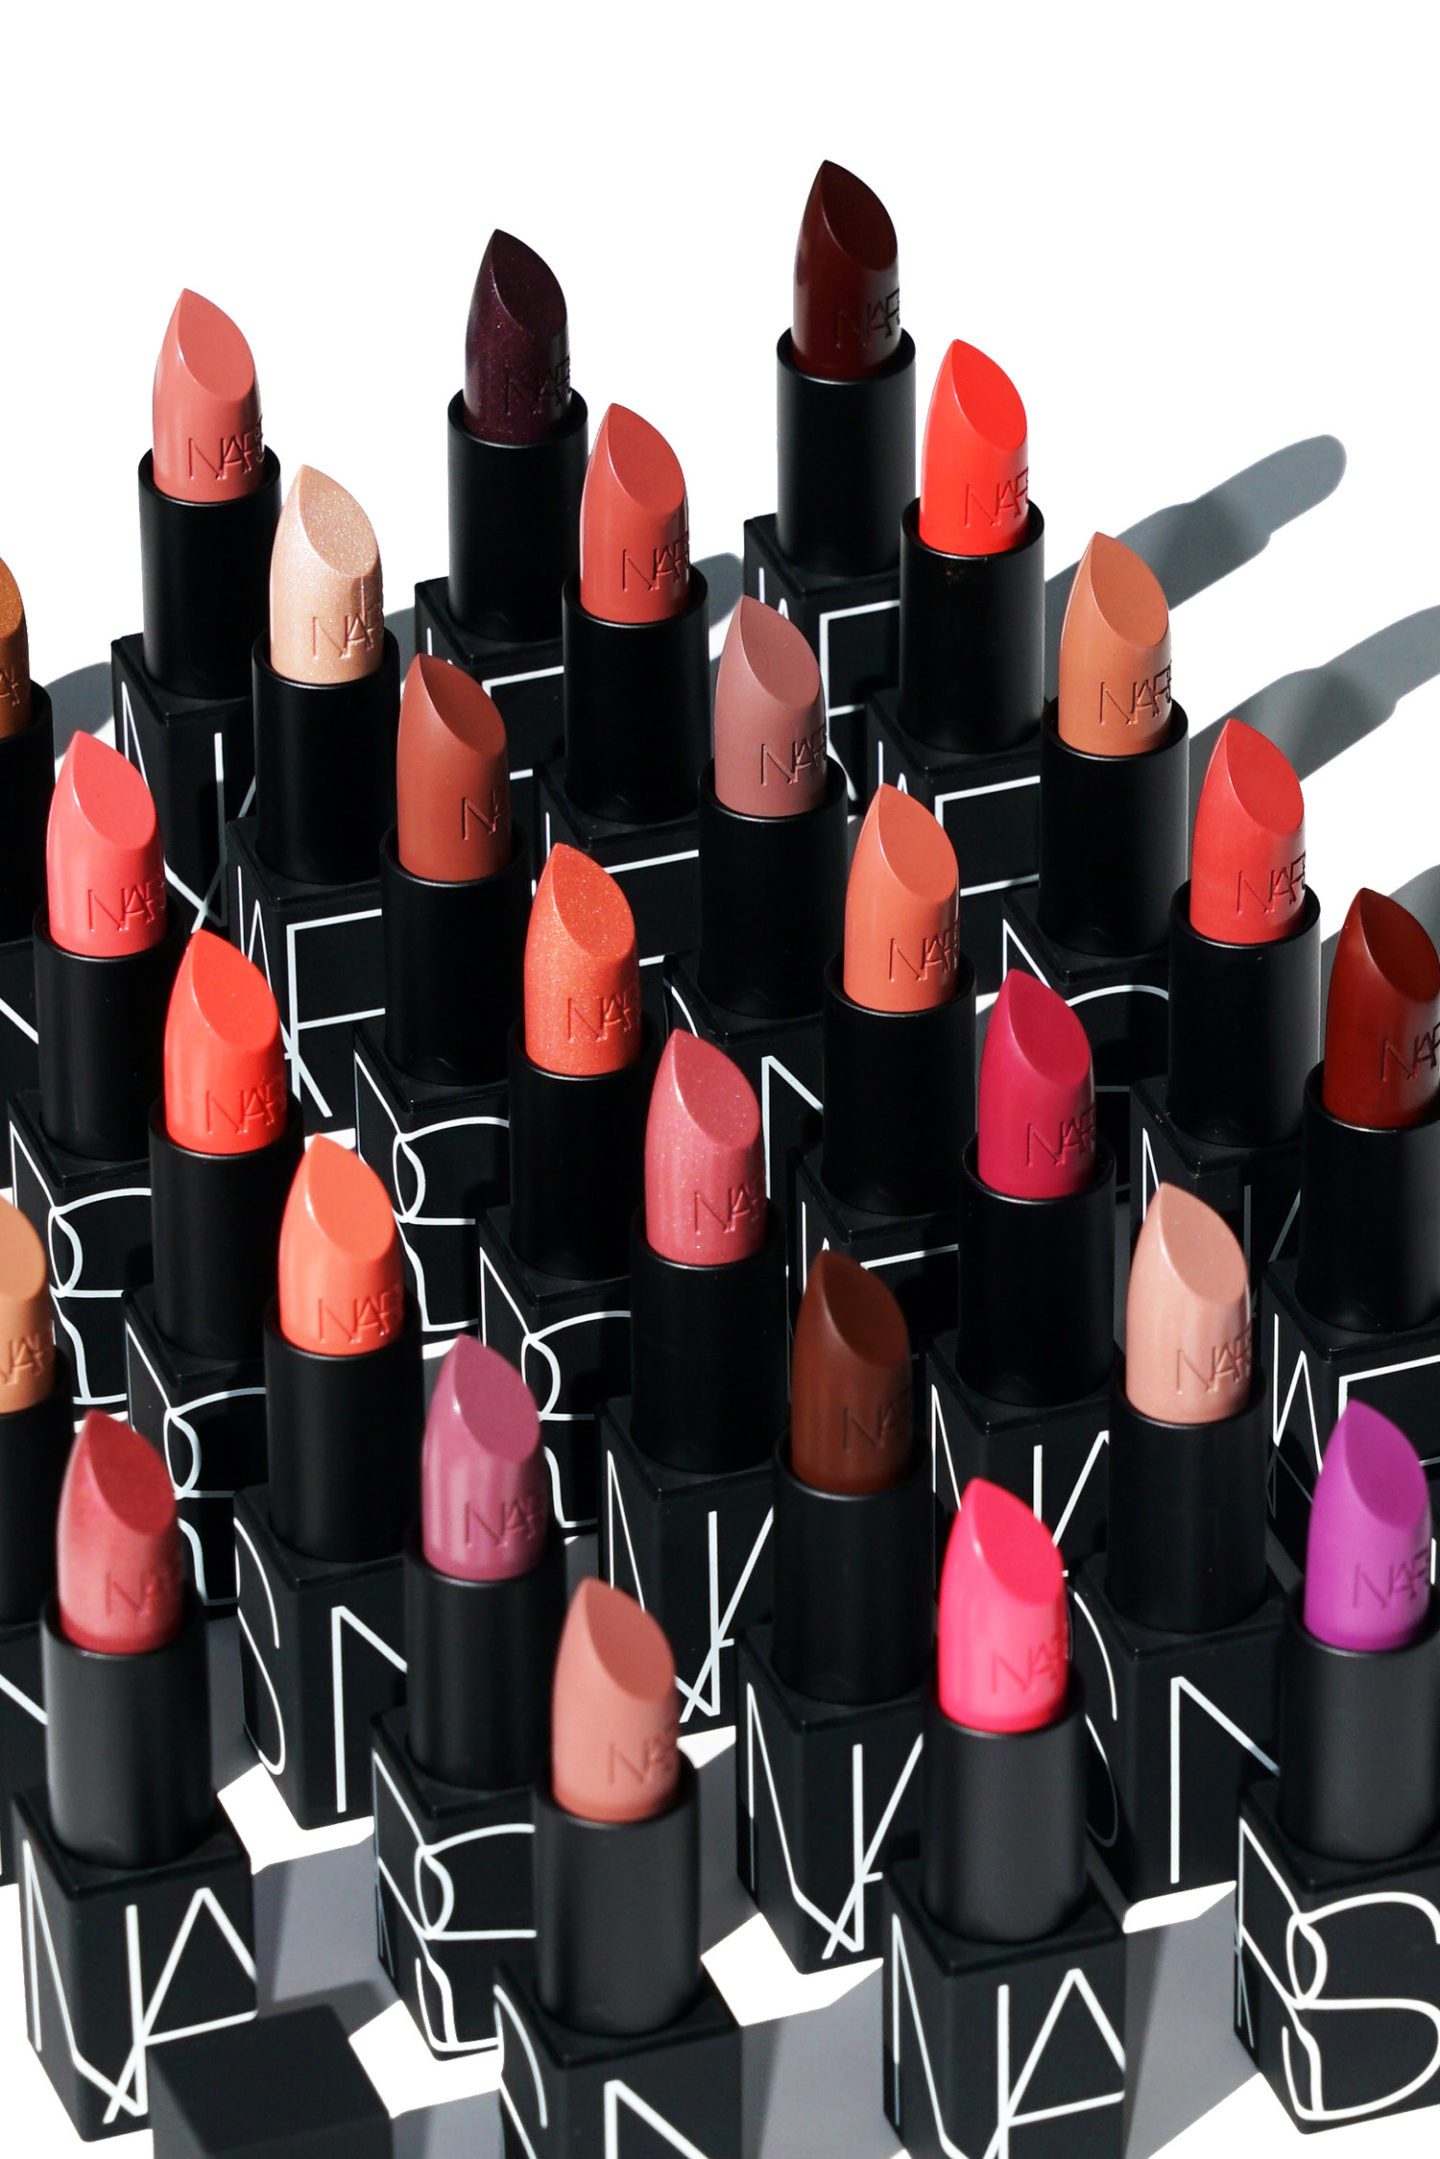 NARS New Lipstick Swatches and Review 2019